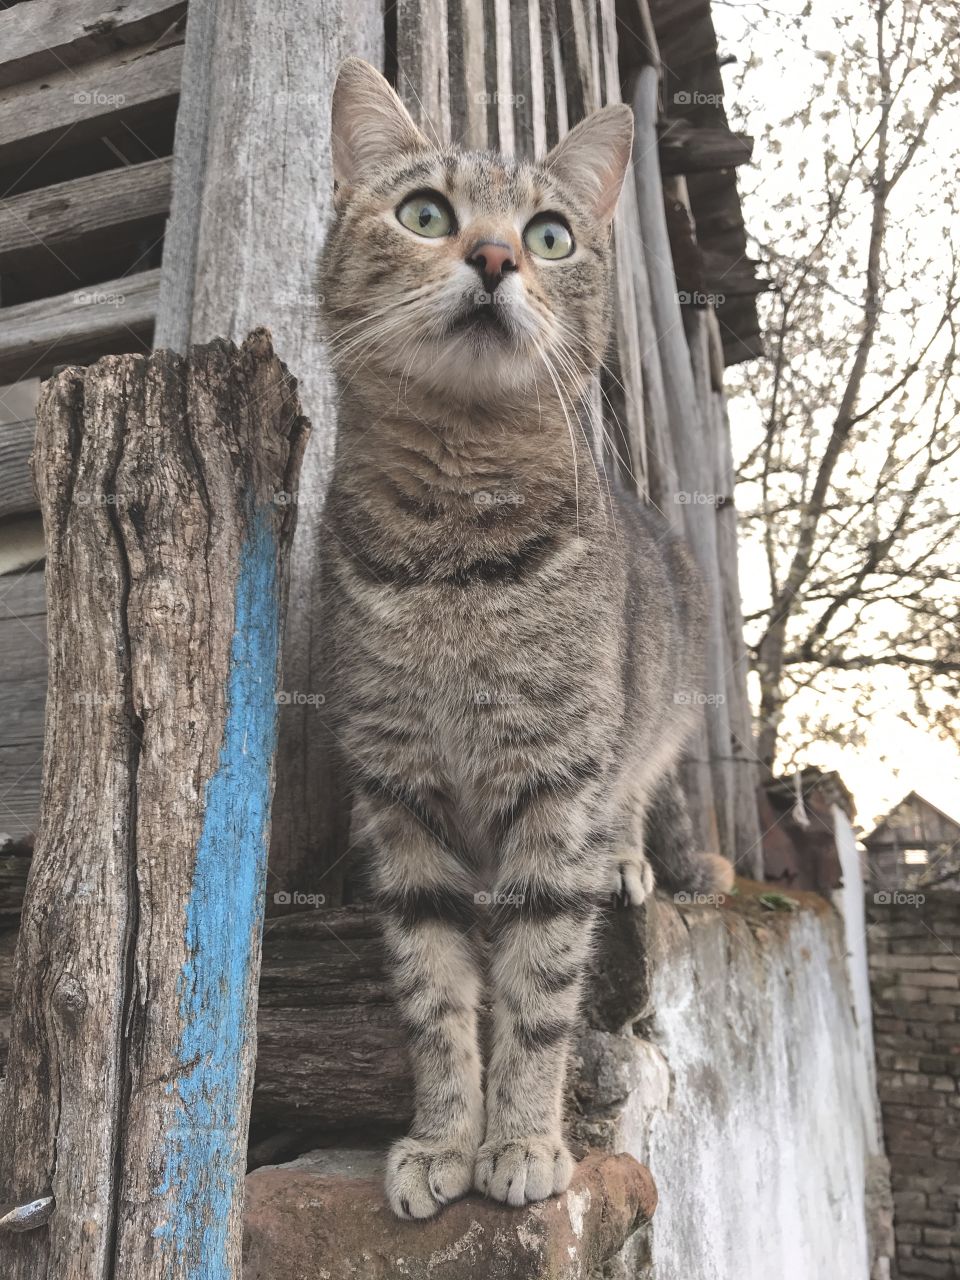 The domestic gray cat with black stripes looking into the distance.